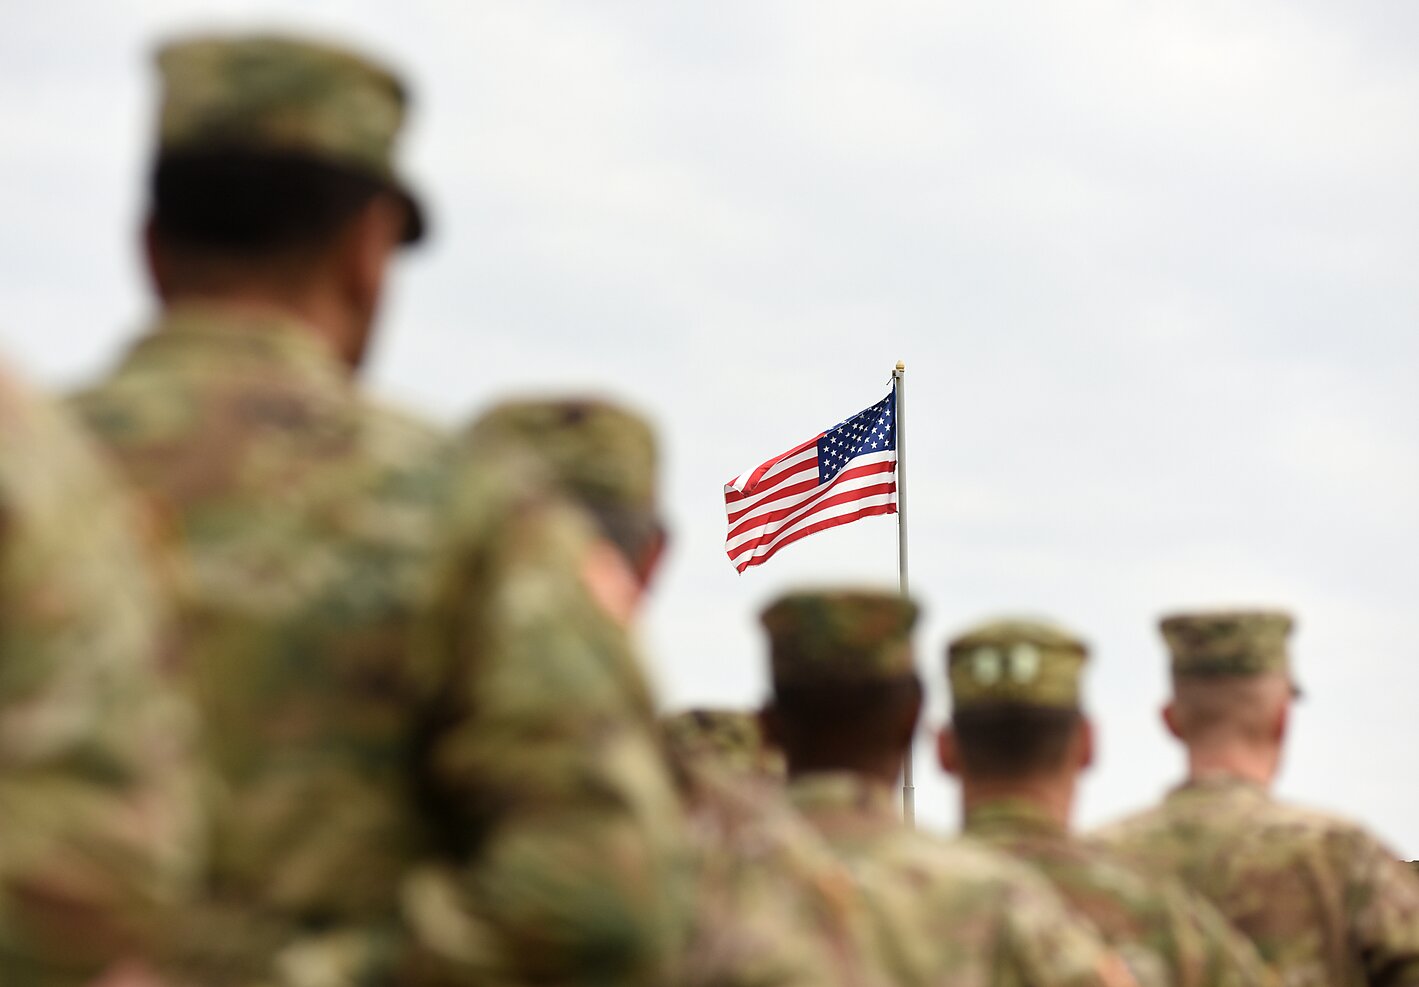 US Troops with an American Flag